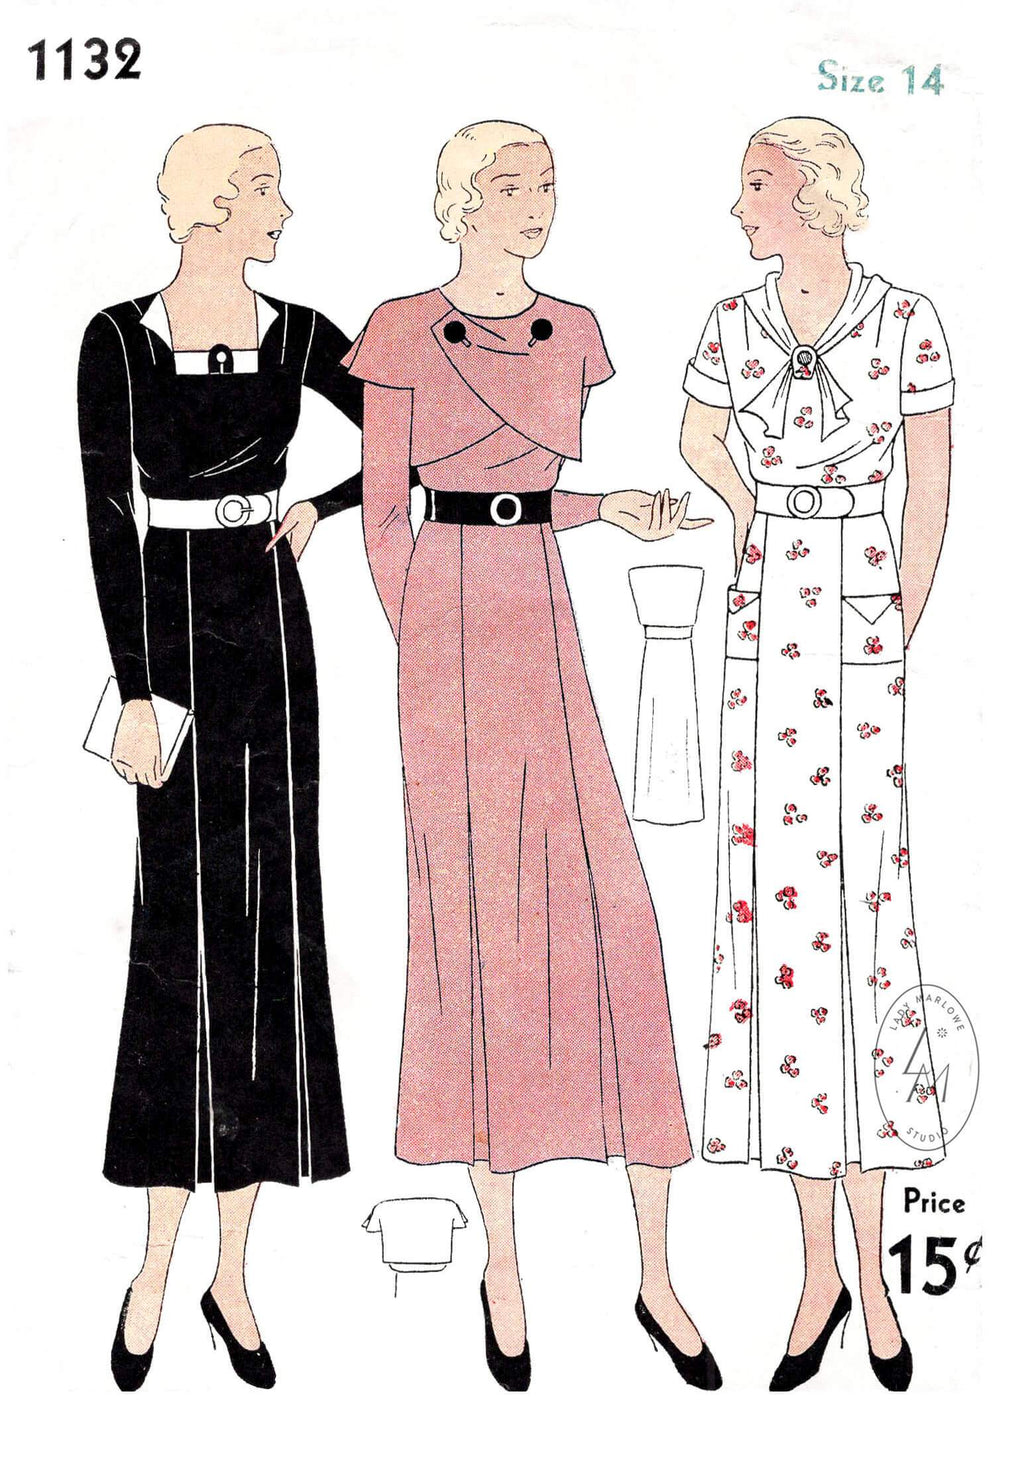 Simplicity 1132 1930s sewing pattern art deco dress in 3 styles capelet long sleeves vintage pattern repro